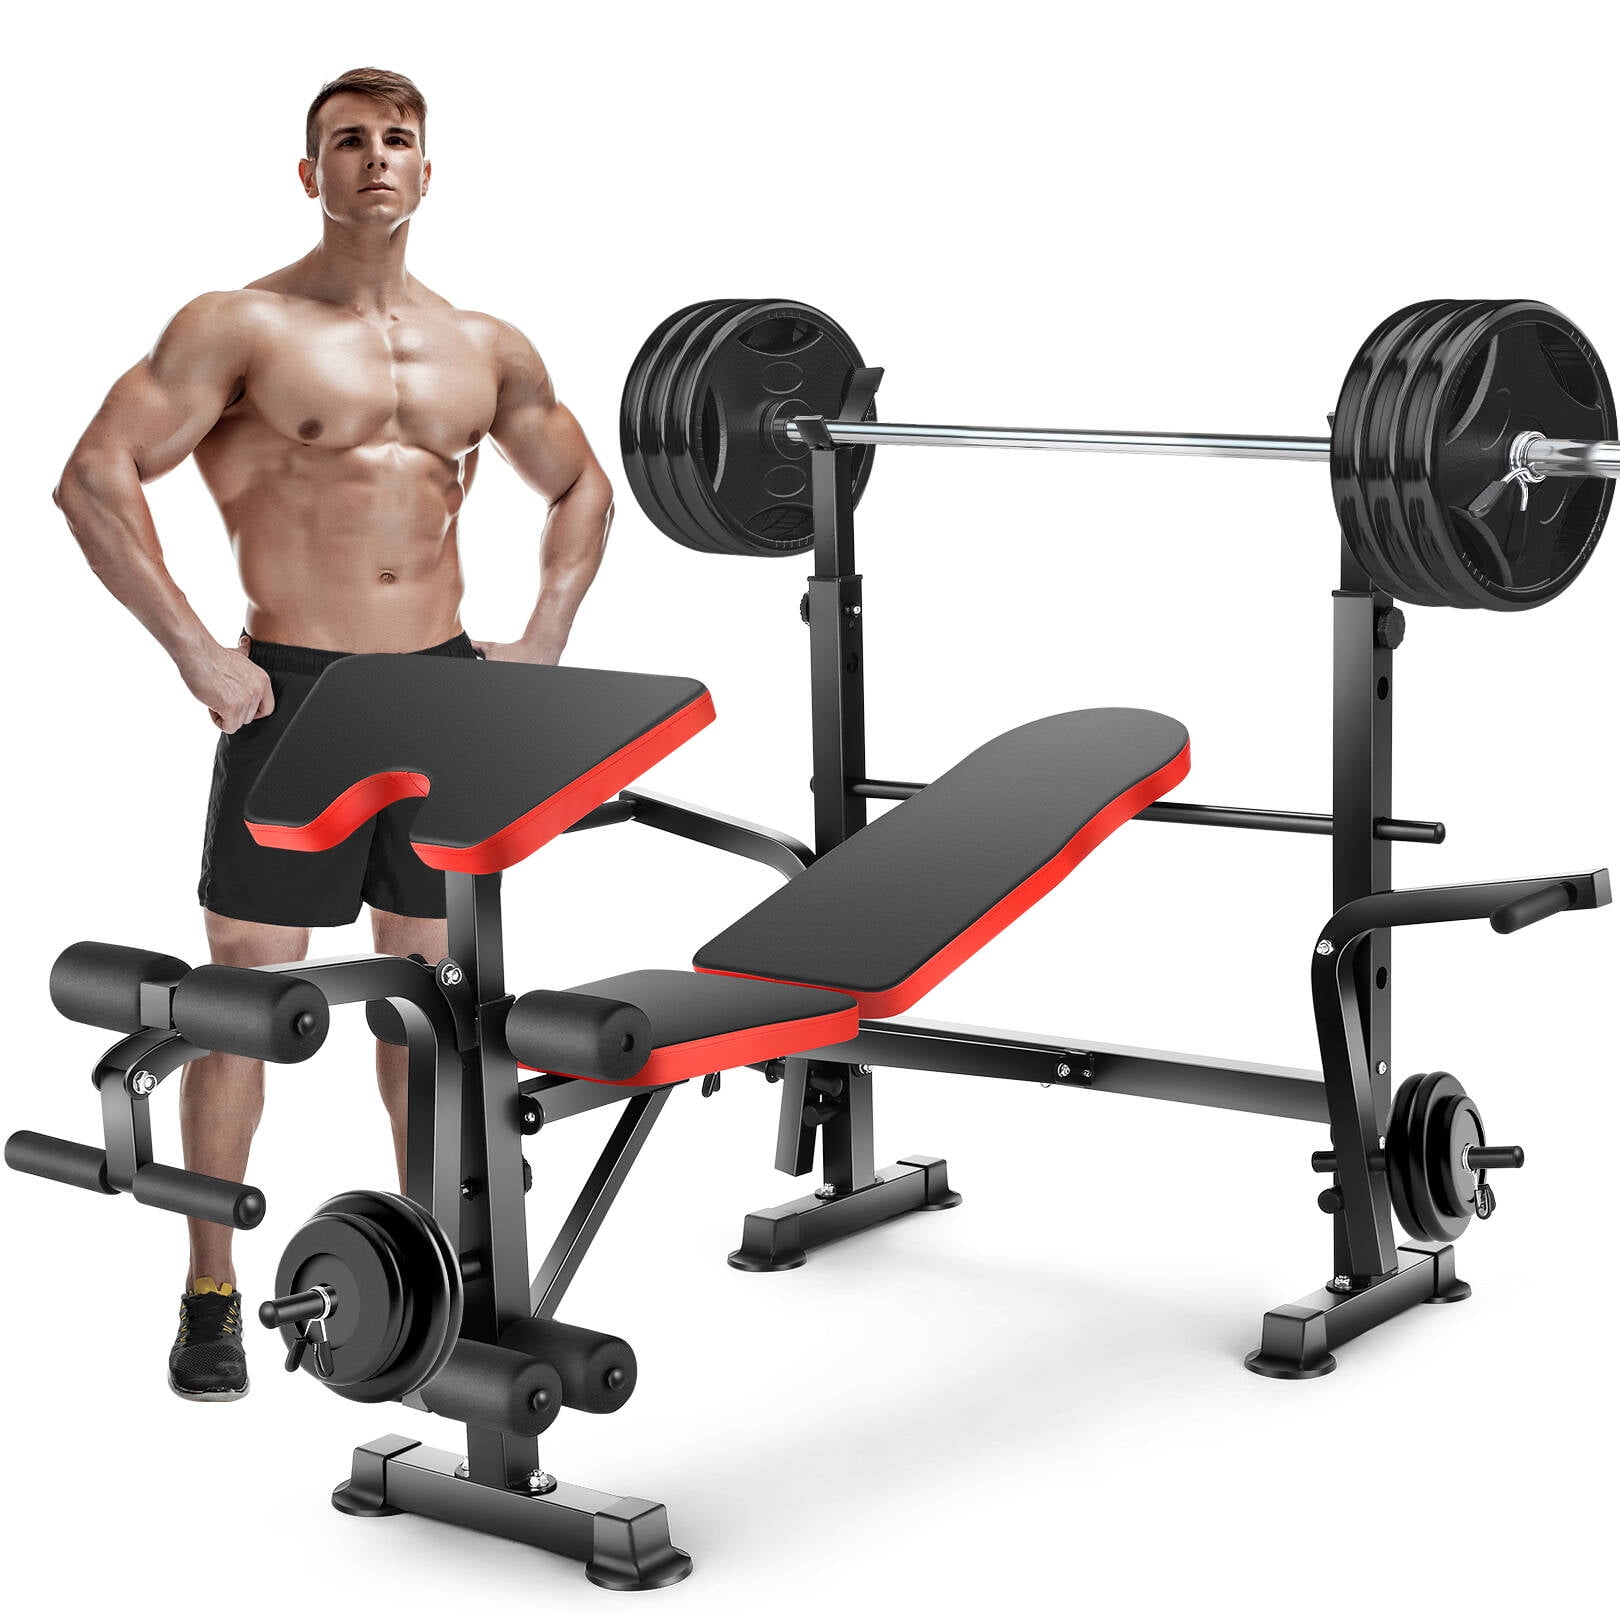 VIBESPARK 5-in-1 600lbs Foldable Workout Bench Set with Barbell Rack Leg Developer